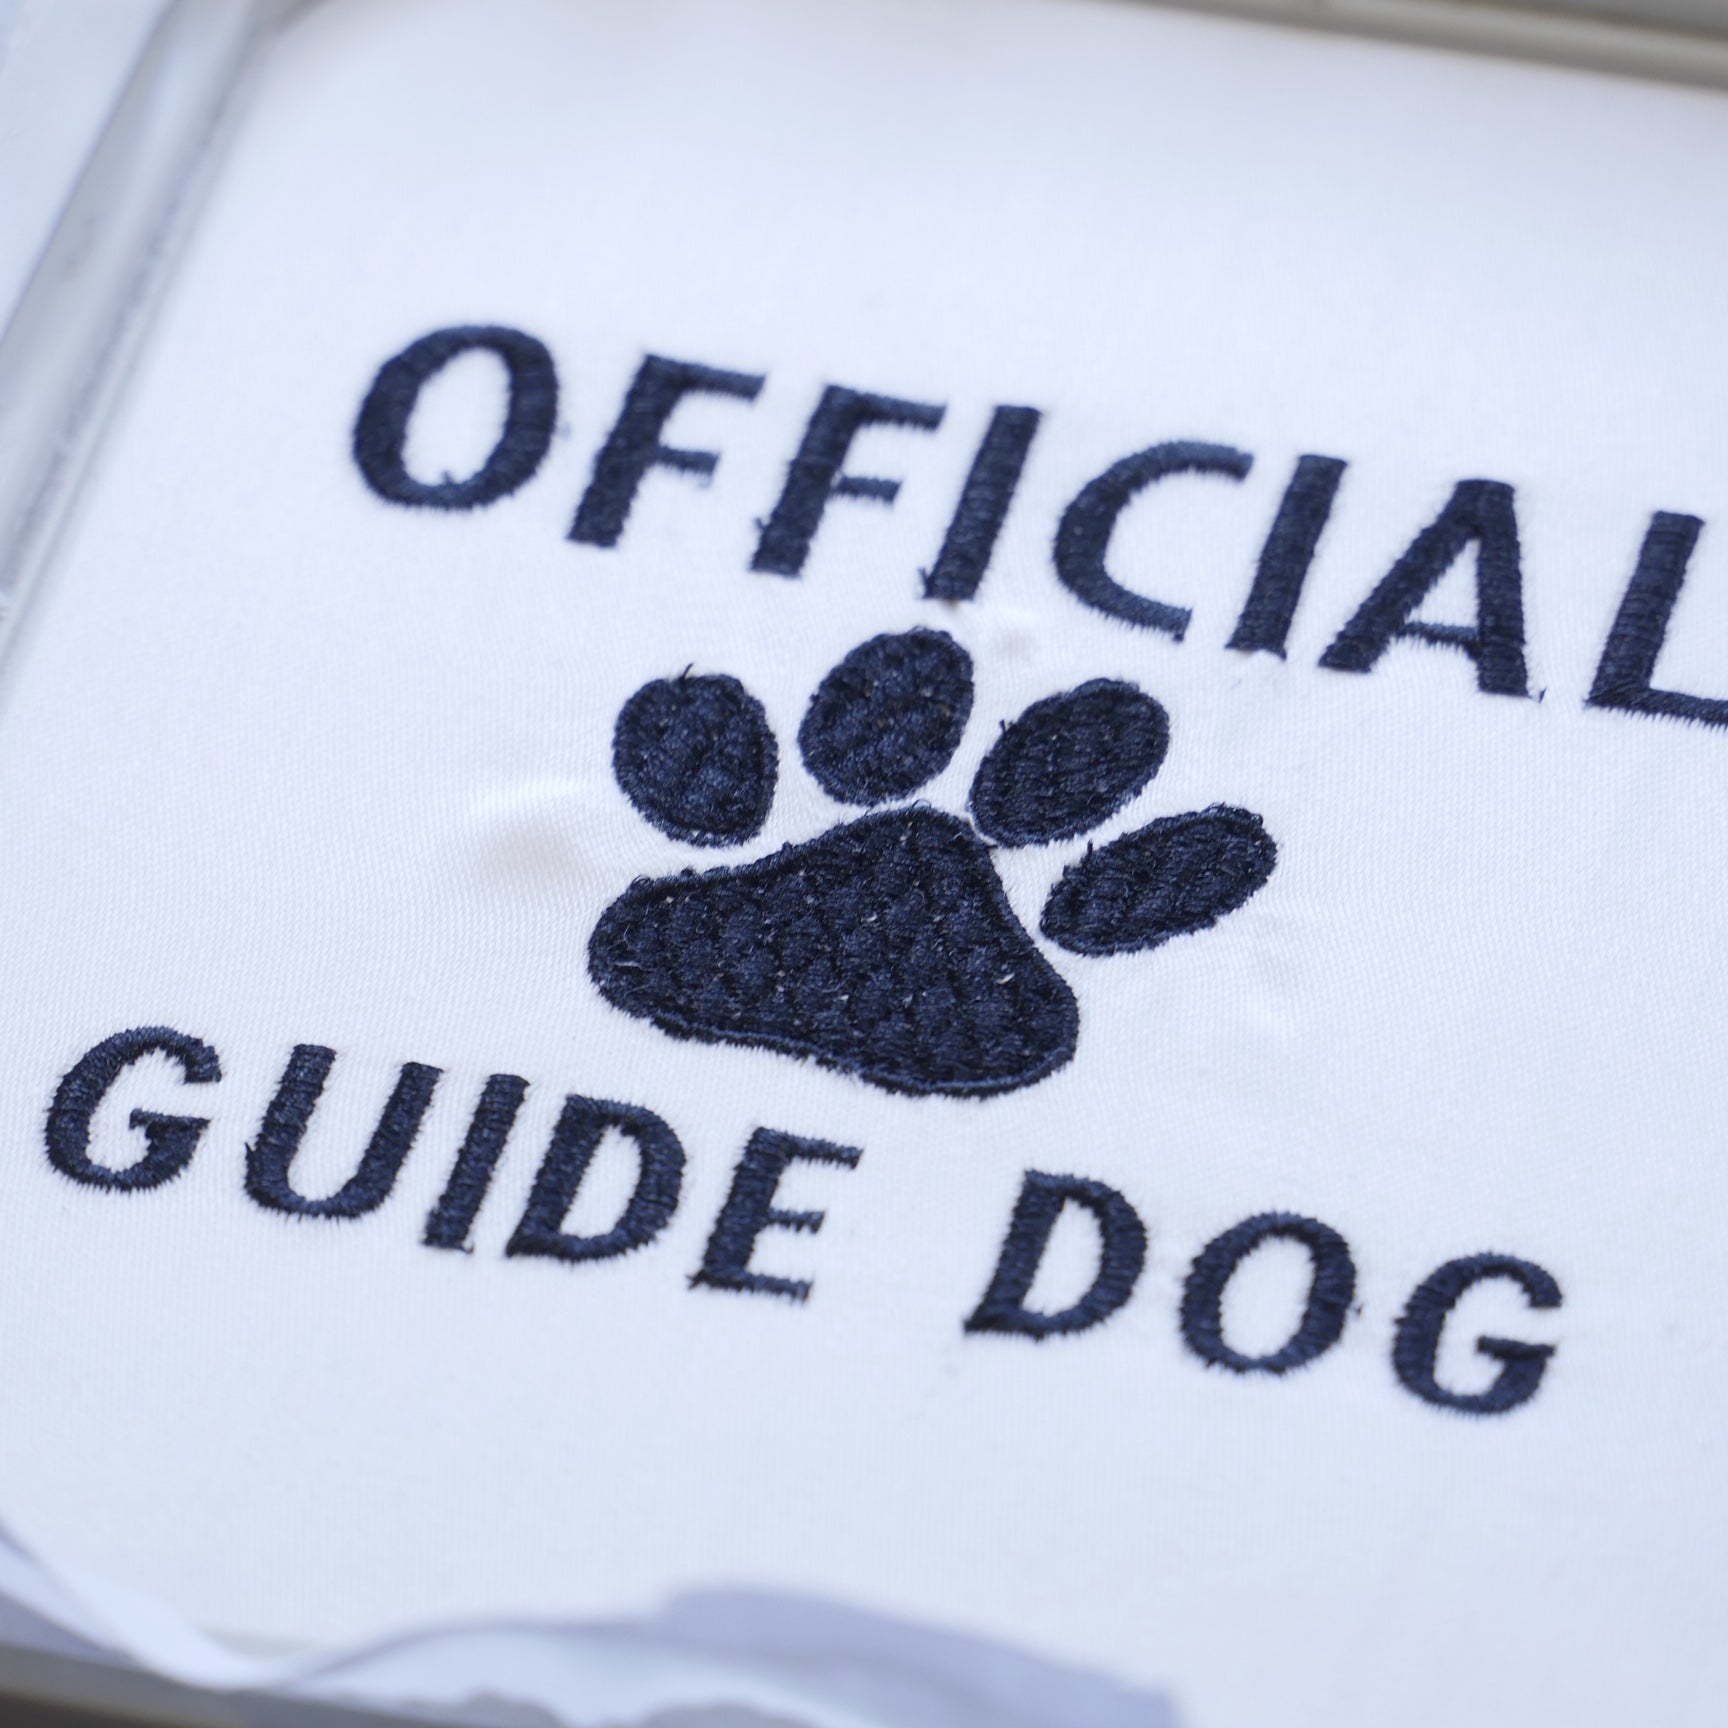 Guide Dog Embroidery Design